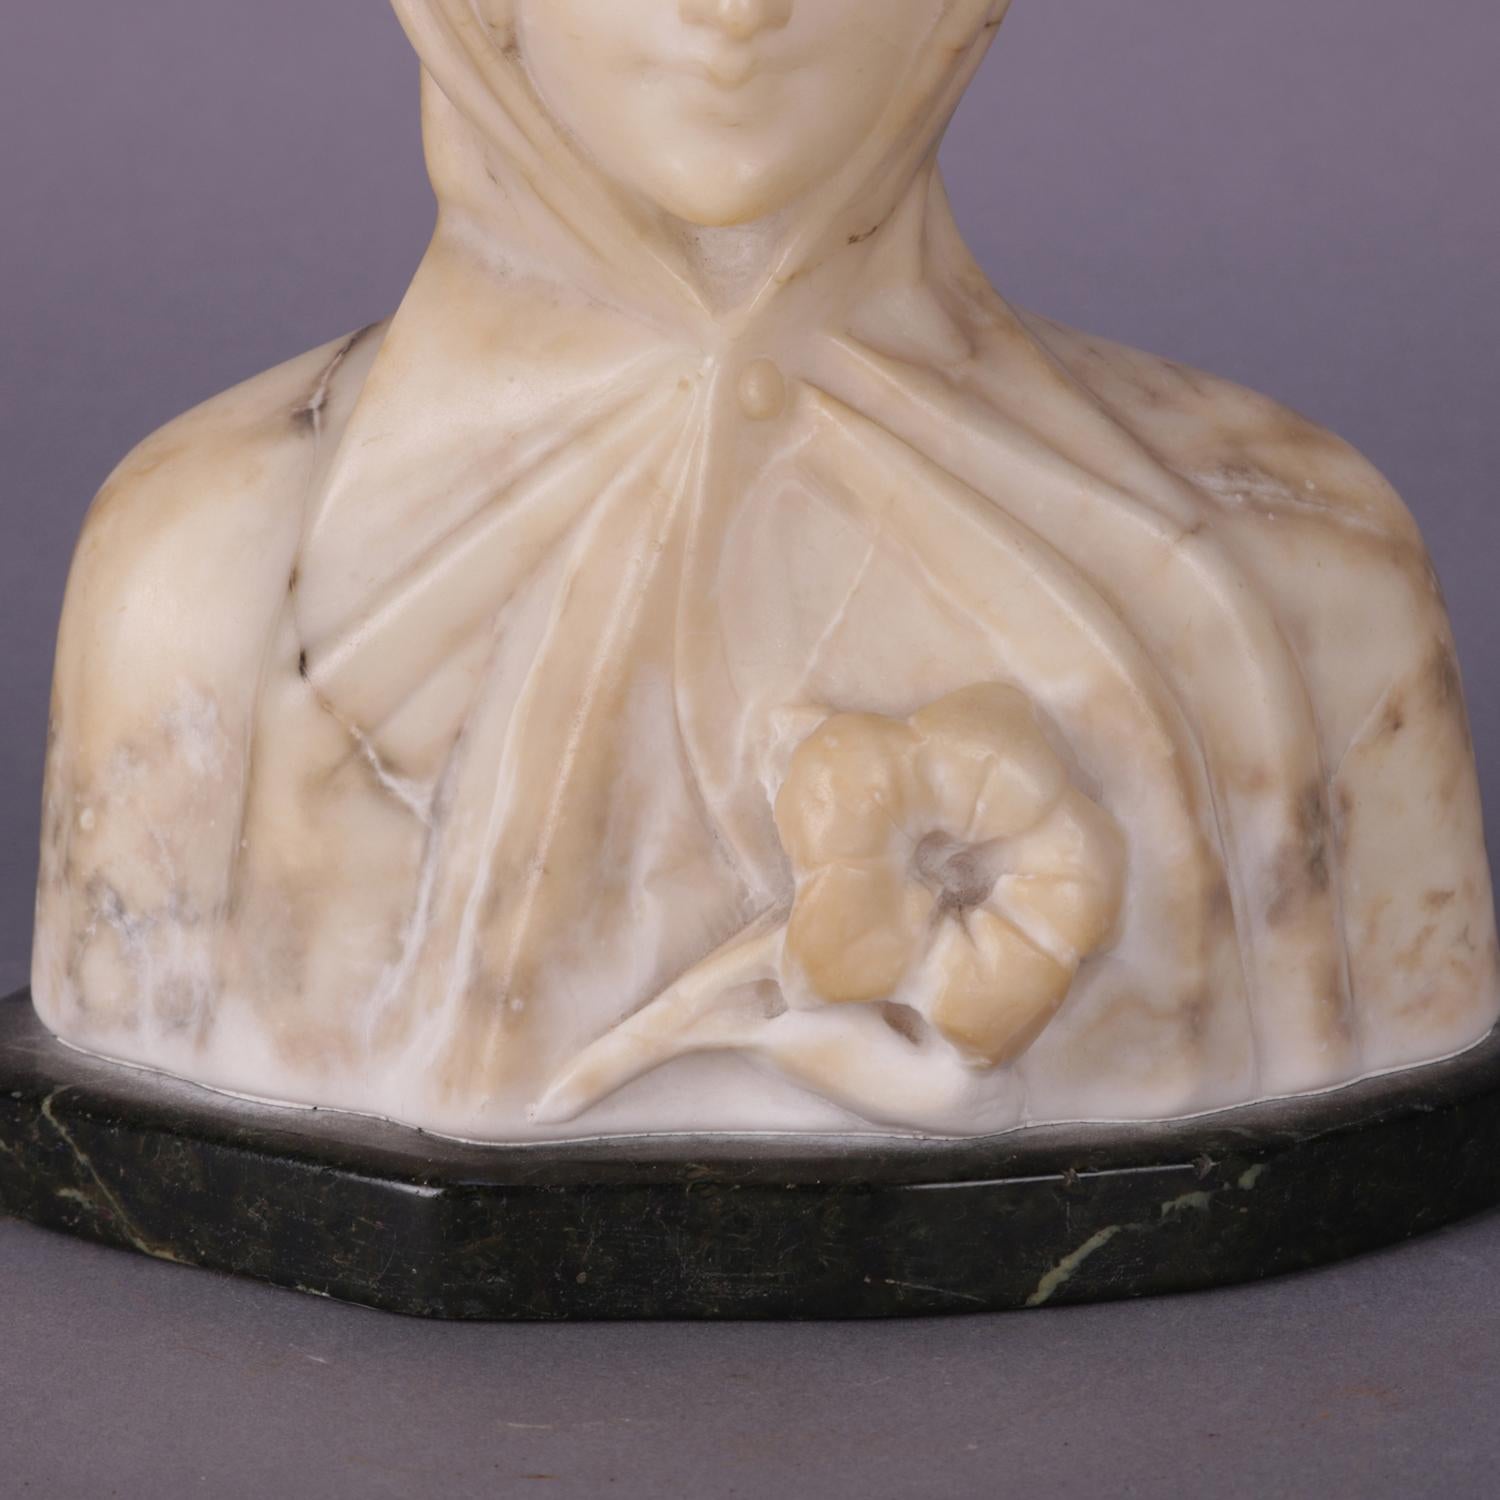 Antique Italian Carved Marble Portrait Sculpture of Mother Mary, circa 1900 (Marmor)